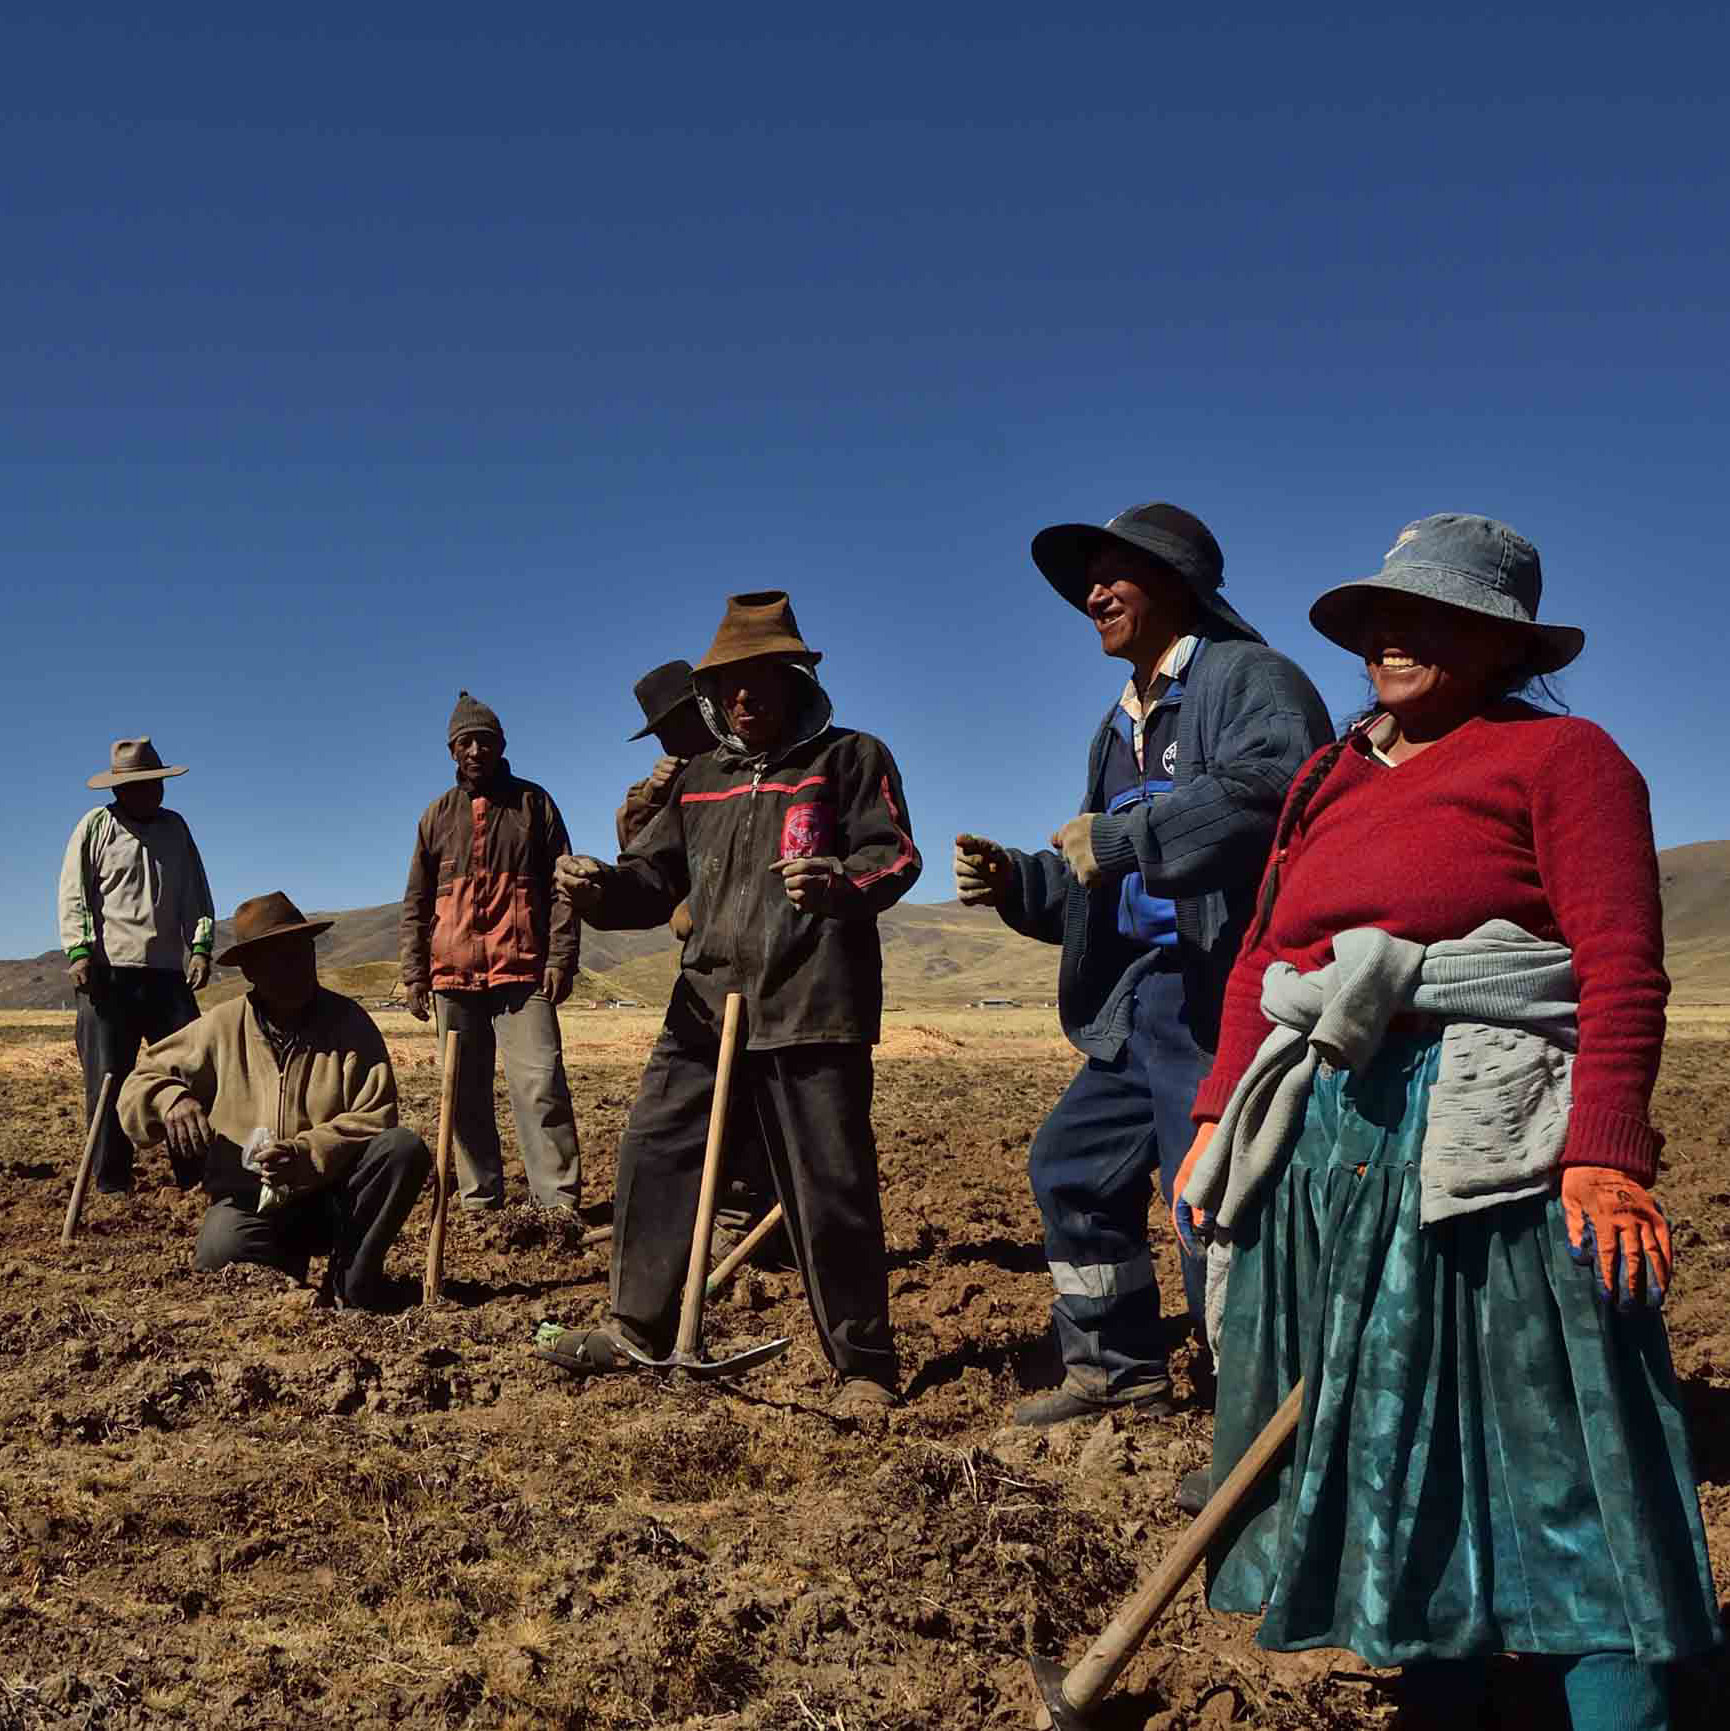 The picture shows a group of small-scale farmers preparing their farmland